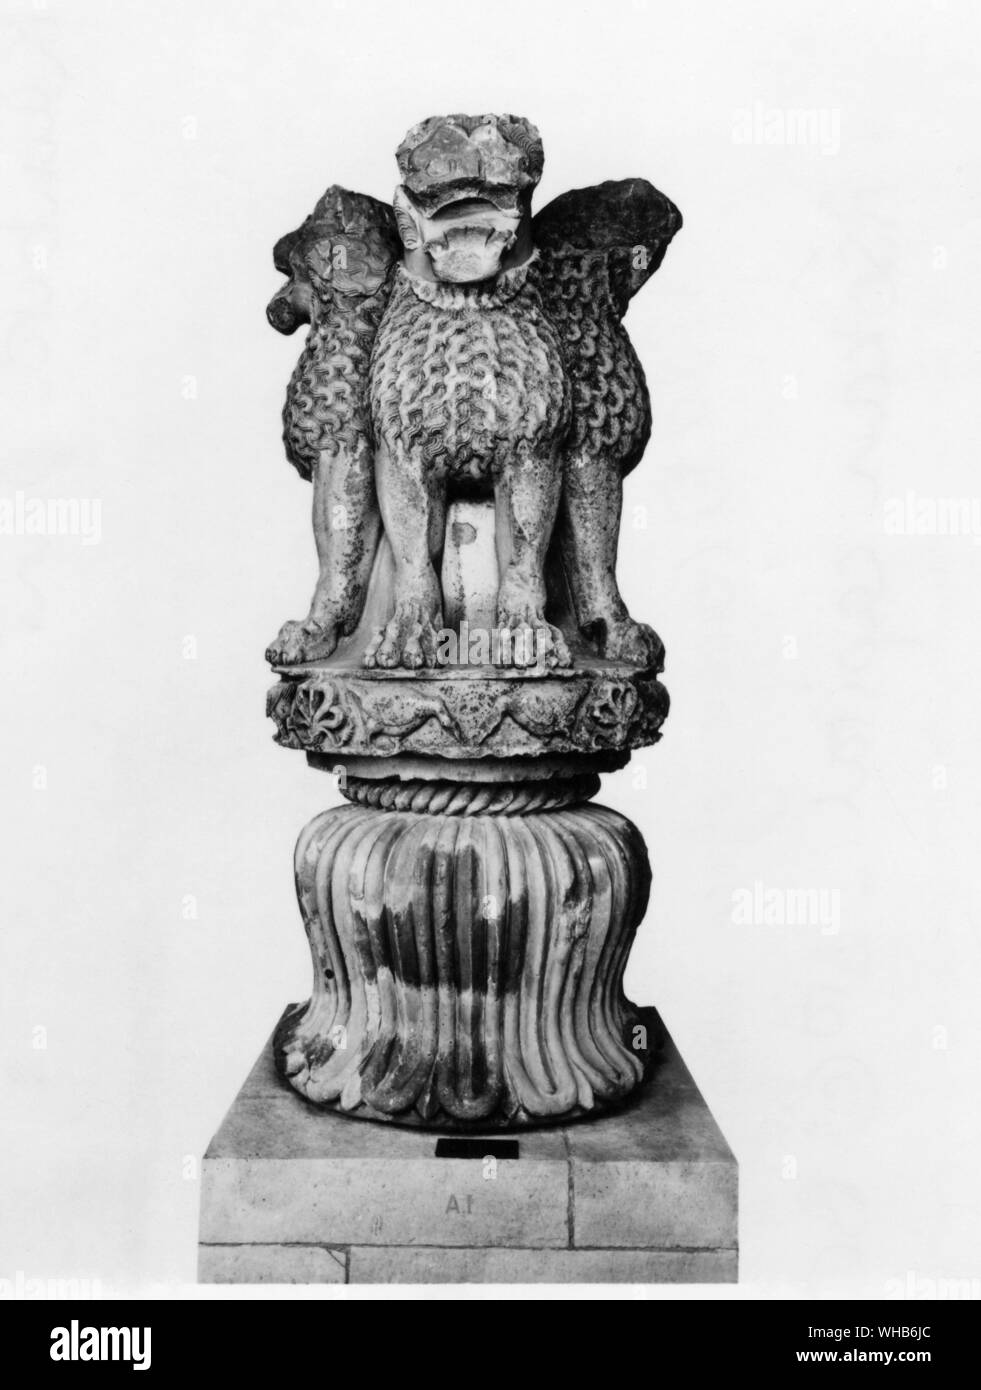 Azhokan monument - Asokan capital - 3rd century BC. The Lions from Sarnath, a monument from Ashoka period. This four-lion motif adorns the national seal of India.. Stock Photo